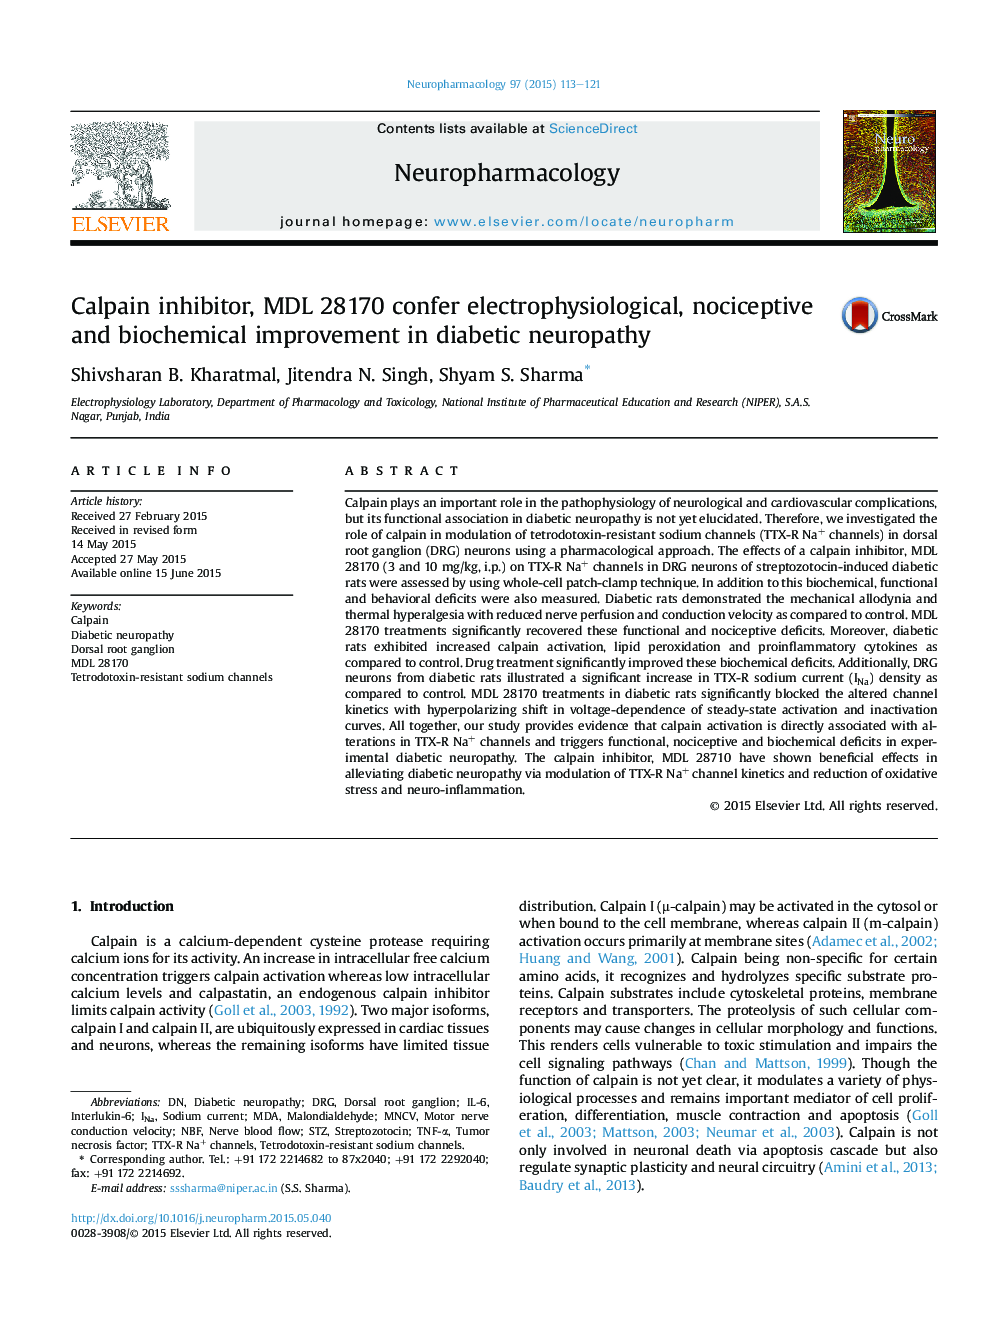 Calpain inhibitor, MDL 28170 confer electrophysiological, nociceptive and biochemical improvement in diabetic neuropathy